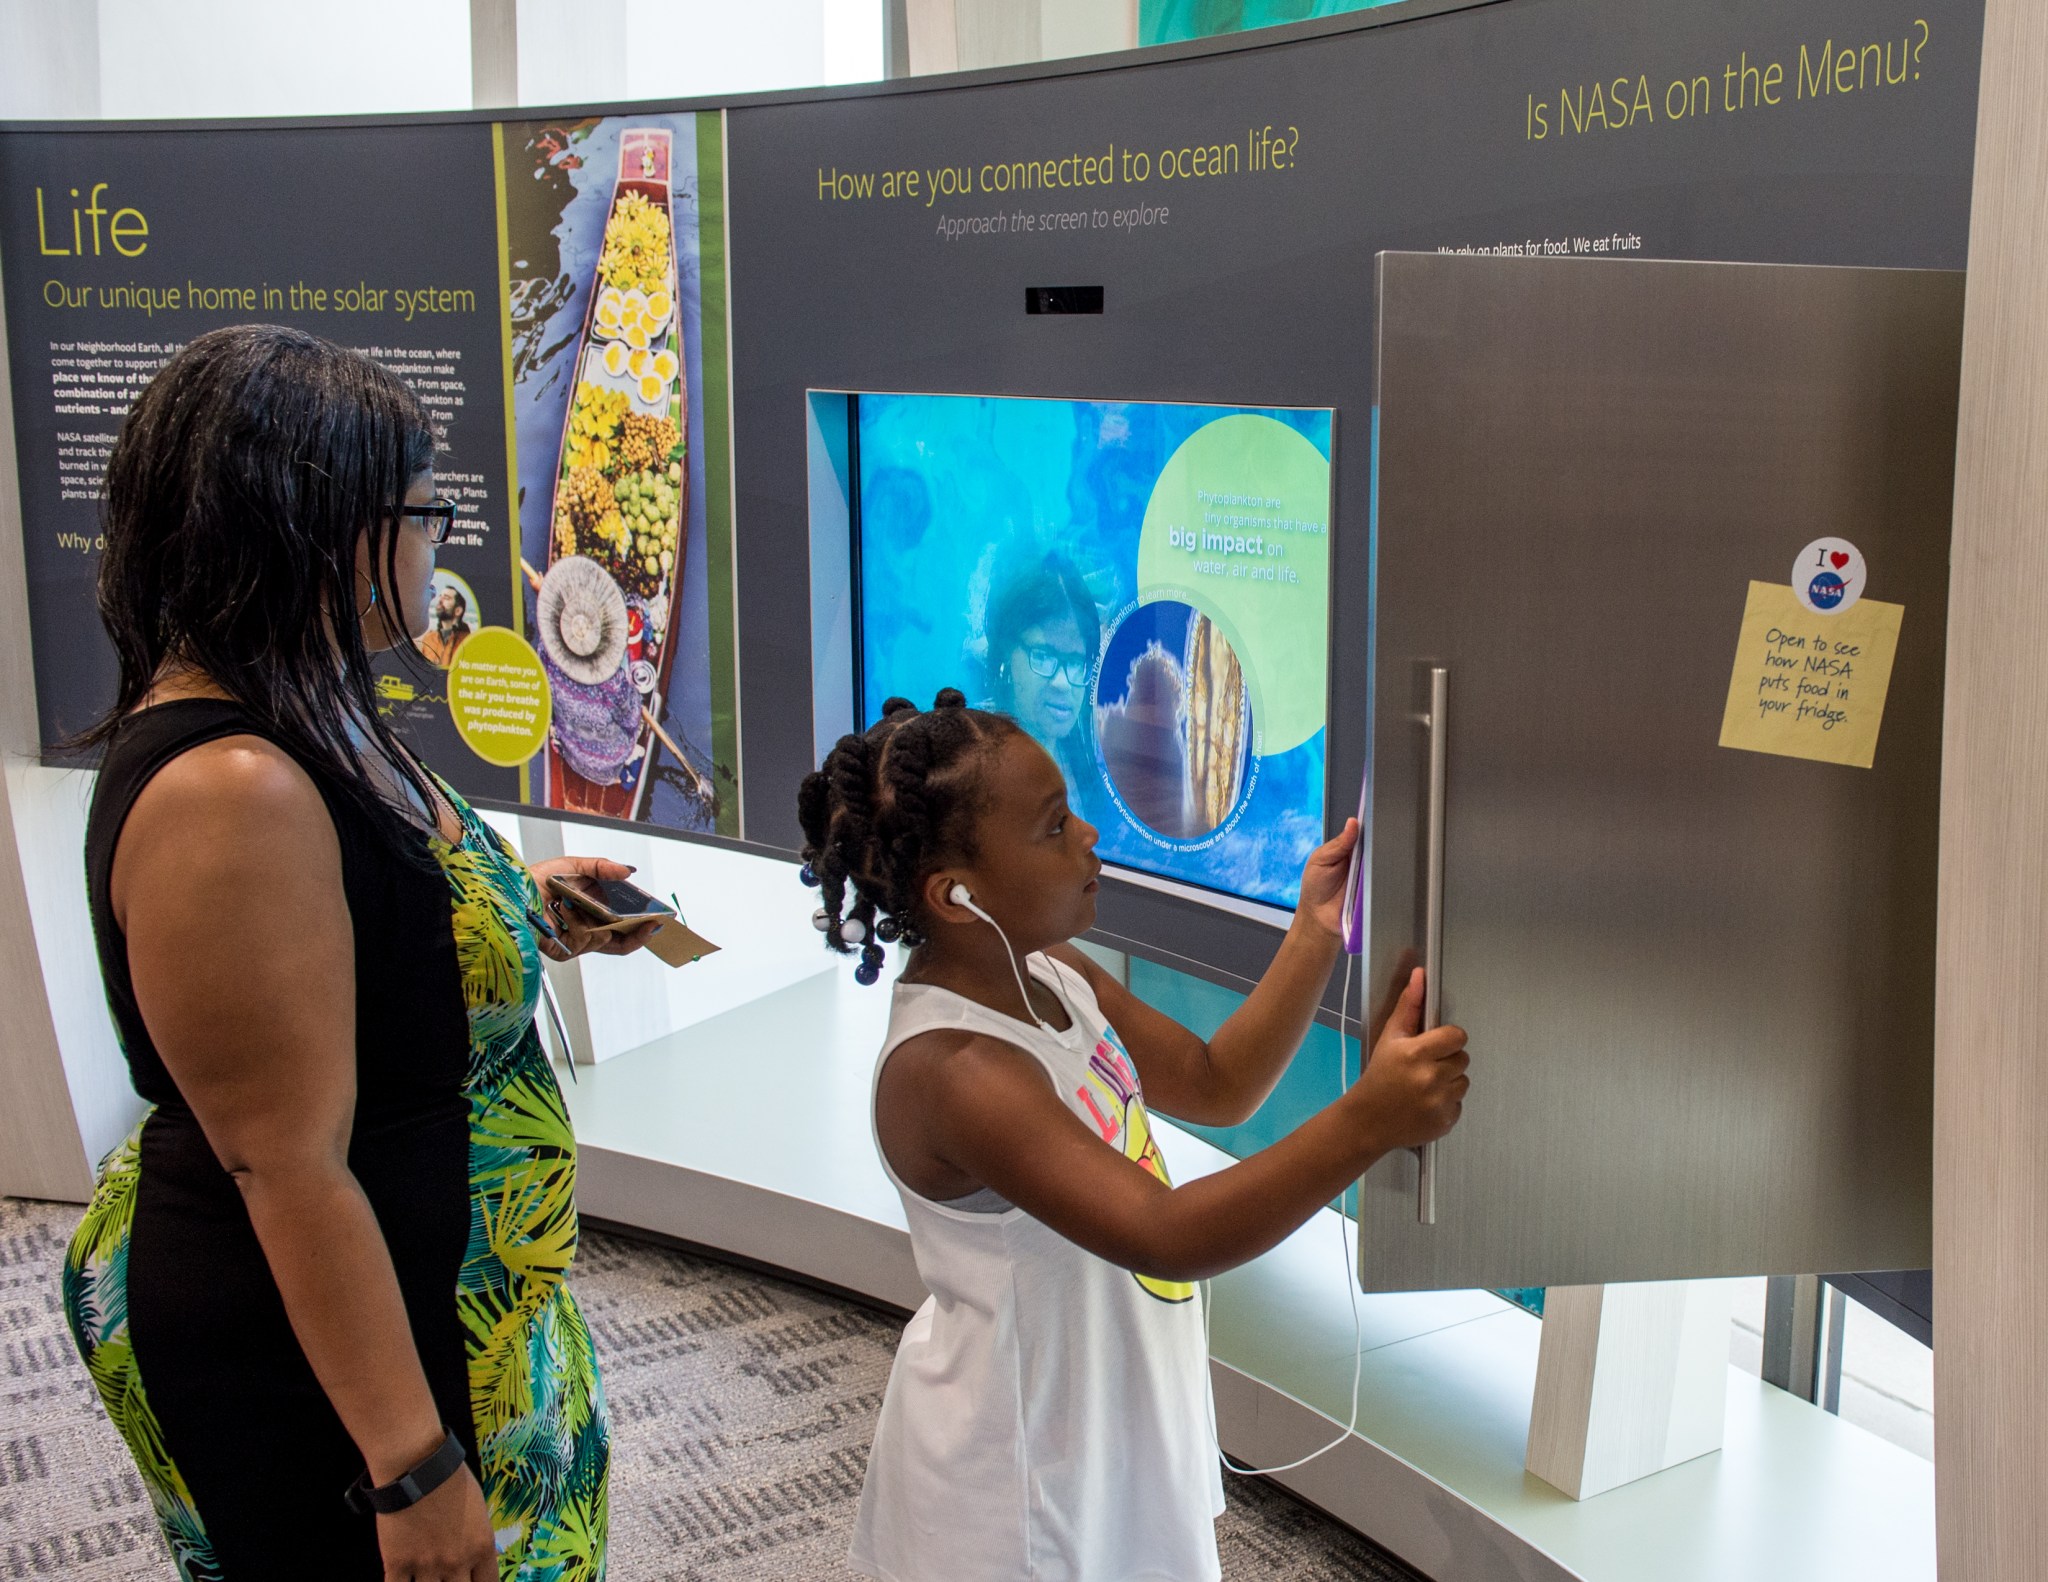 A young Black girl wearing a white tank top opens a silver door in a wall-mounted museum exhibit, holding a purple phone with white earbuds plugged into her ears. The exhibit discusses ocean life on Earth, and the silver door opens like a refrigerator to an exhibit about food. A Black woman wearing a black and green dress looks on.